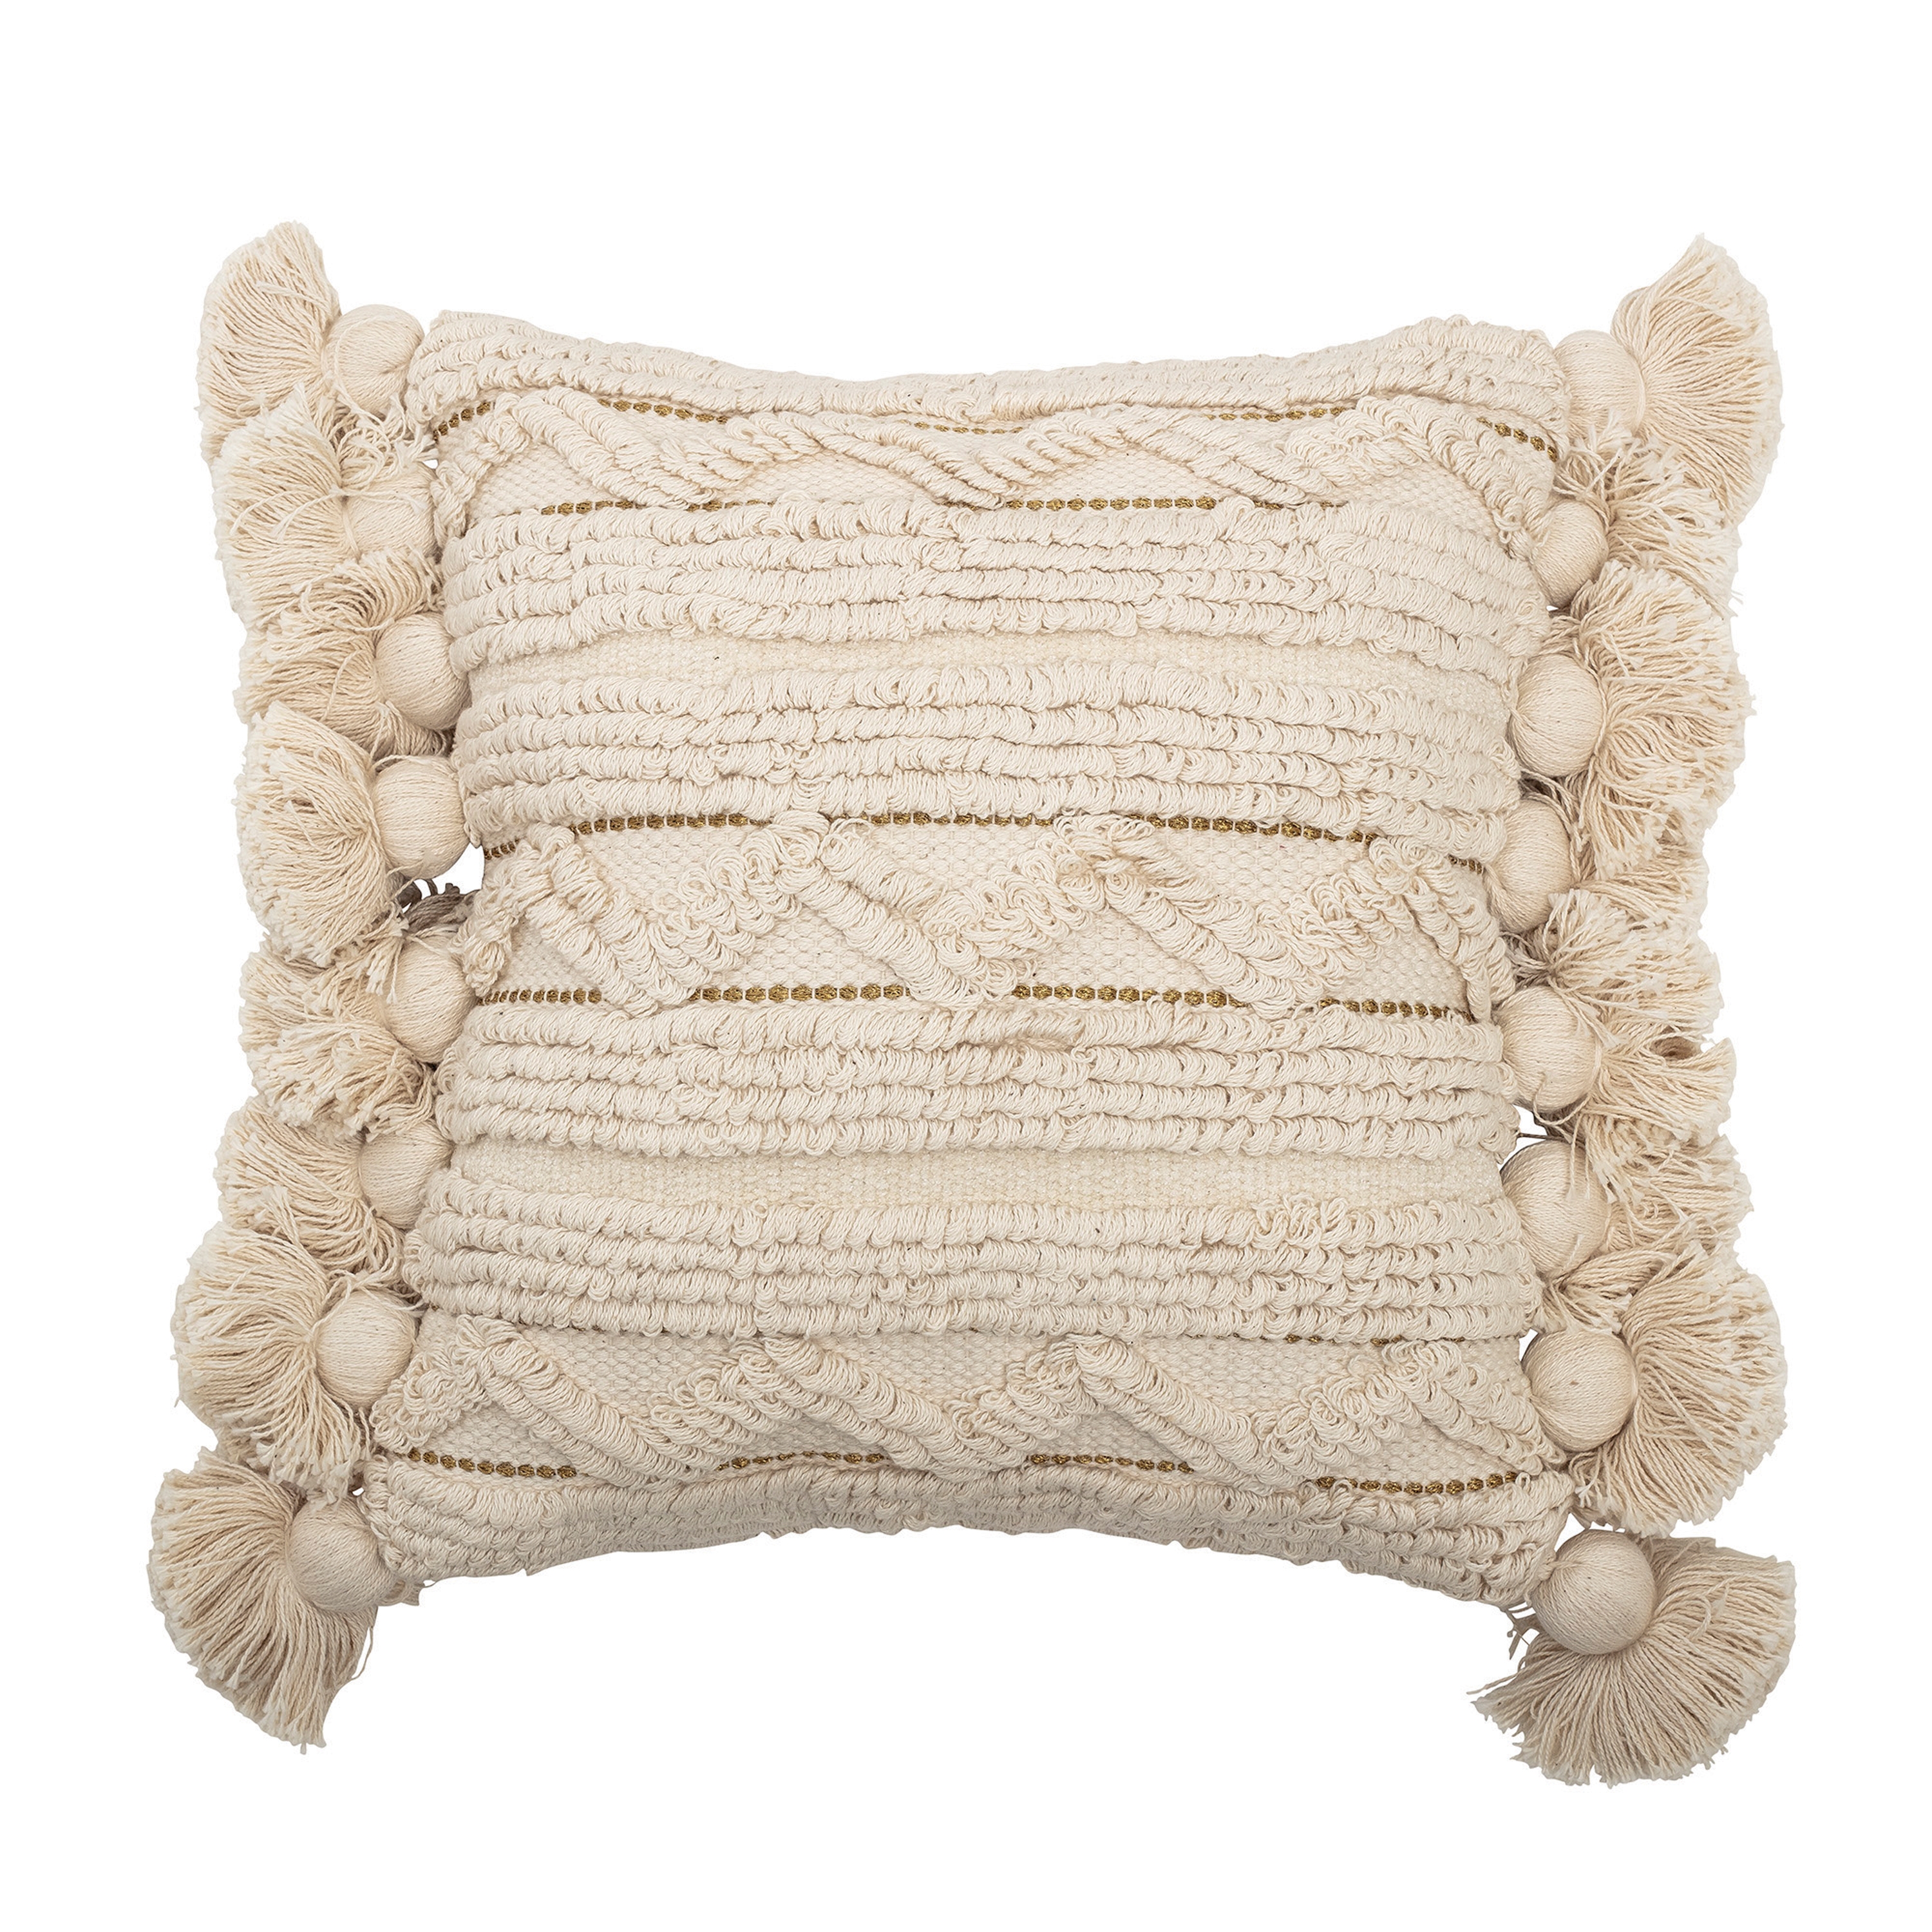 Off-White Cotton Looped Pillow with Gold Metallic Thread Accents, Tassels & Solid Off-White Back - Image 0